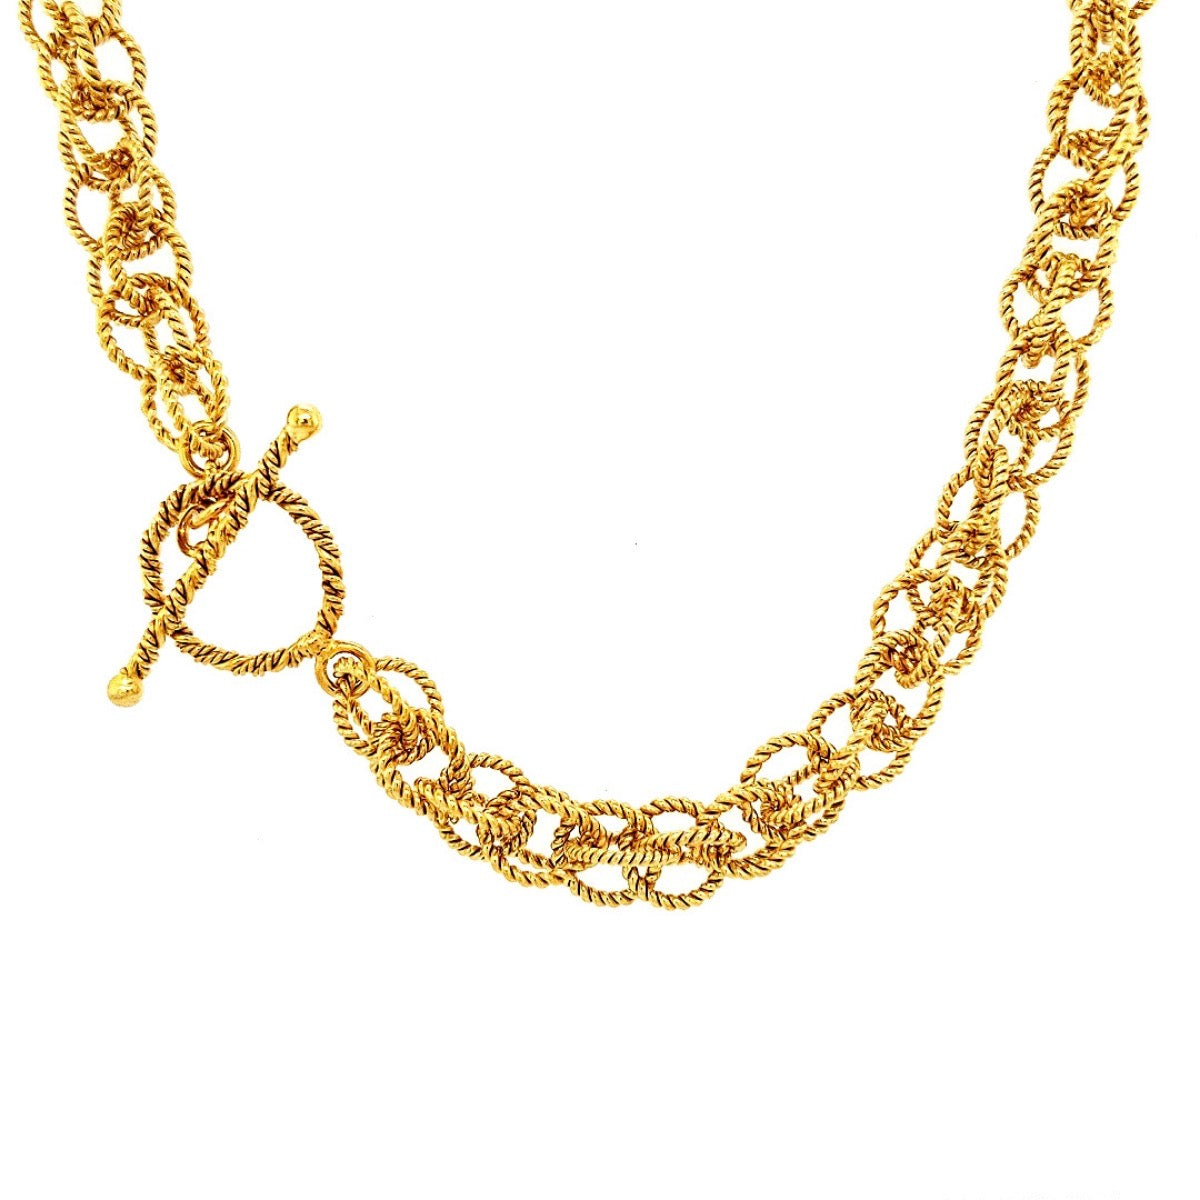 Arpaia 24K Vermeil Spinner Choker - main image with white background using light box